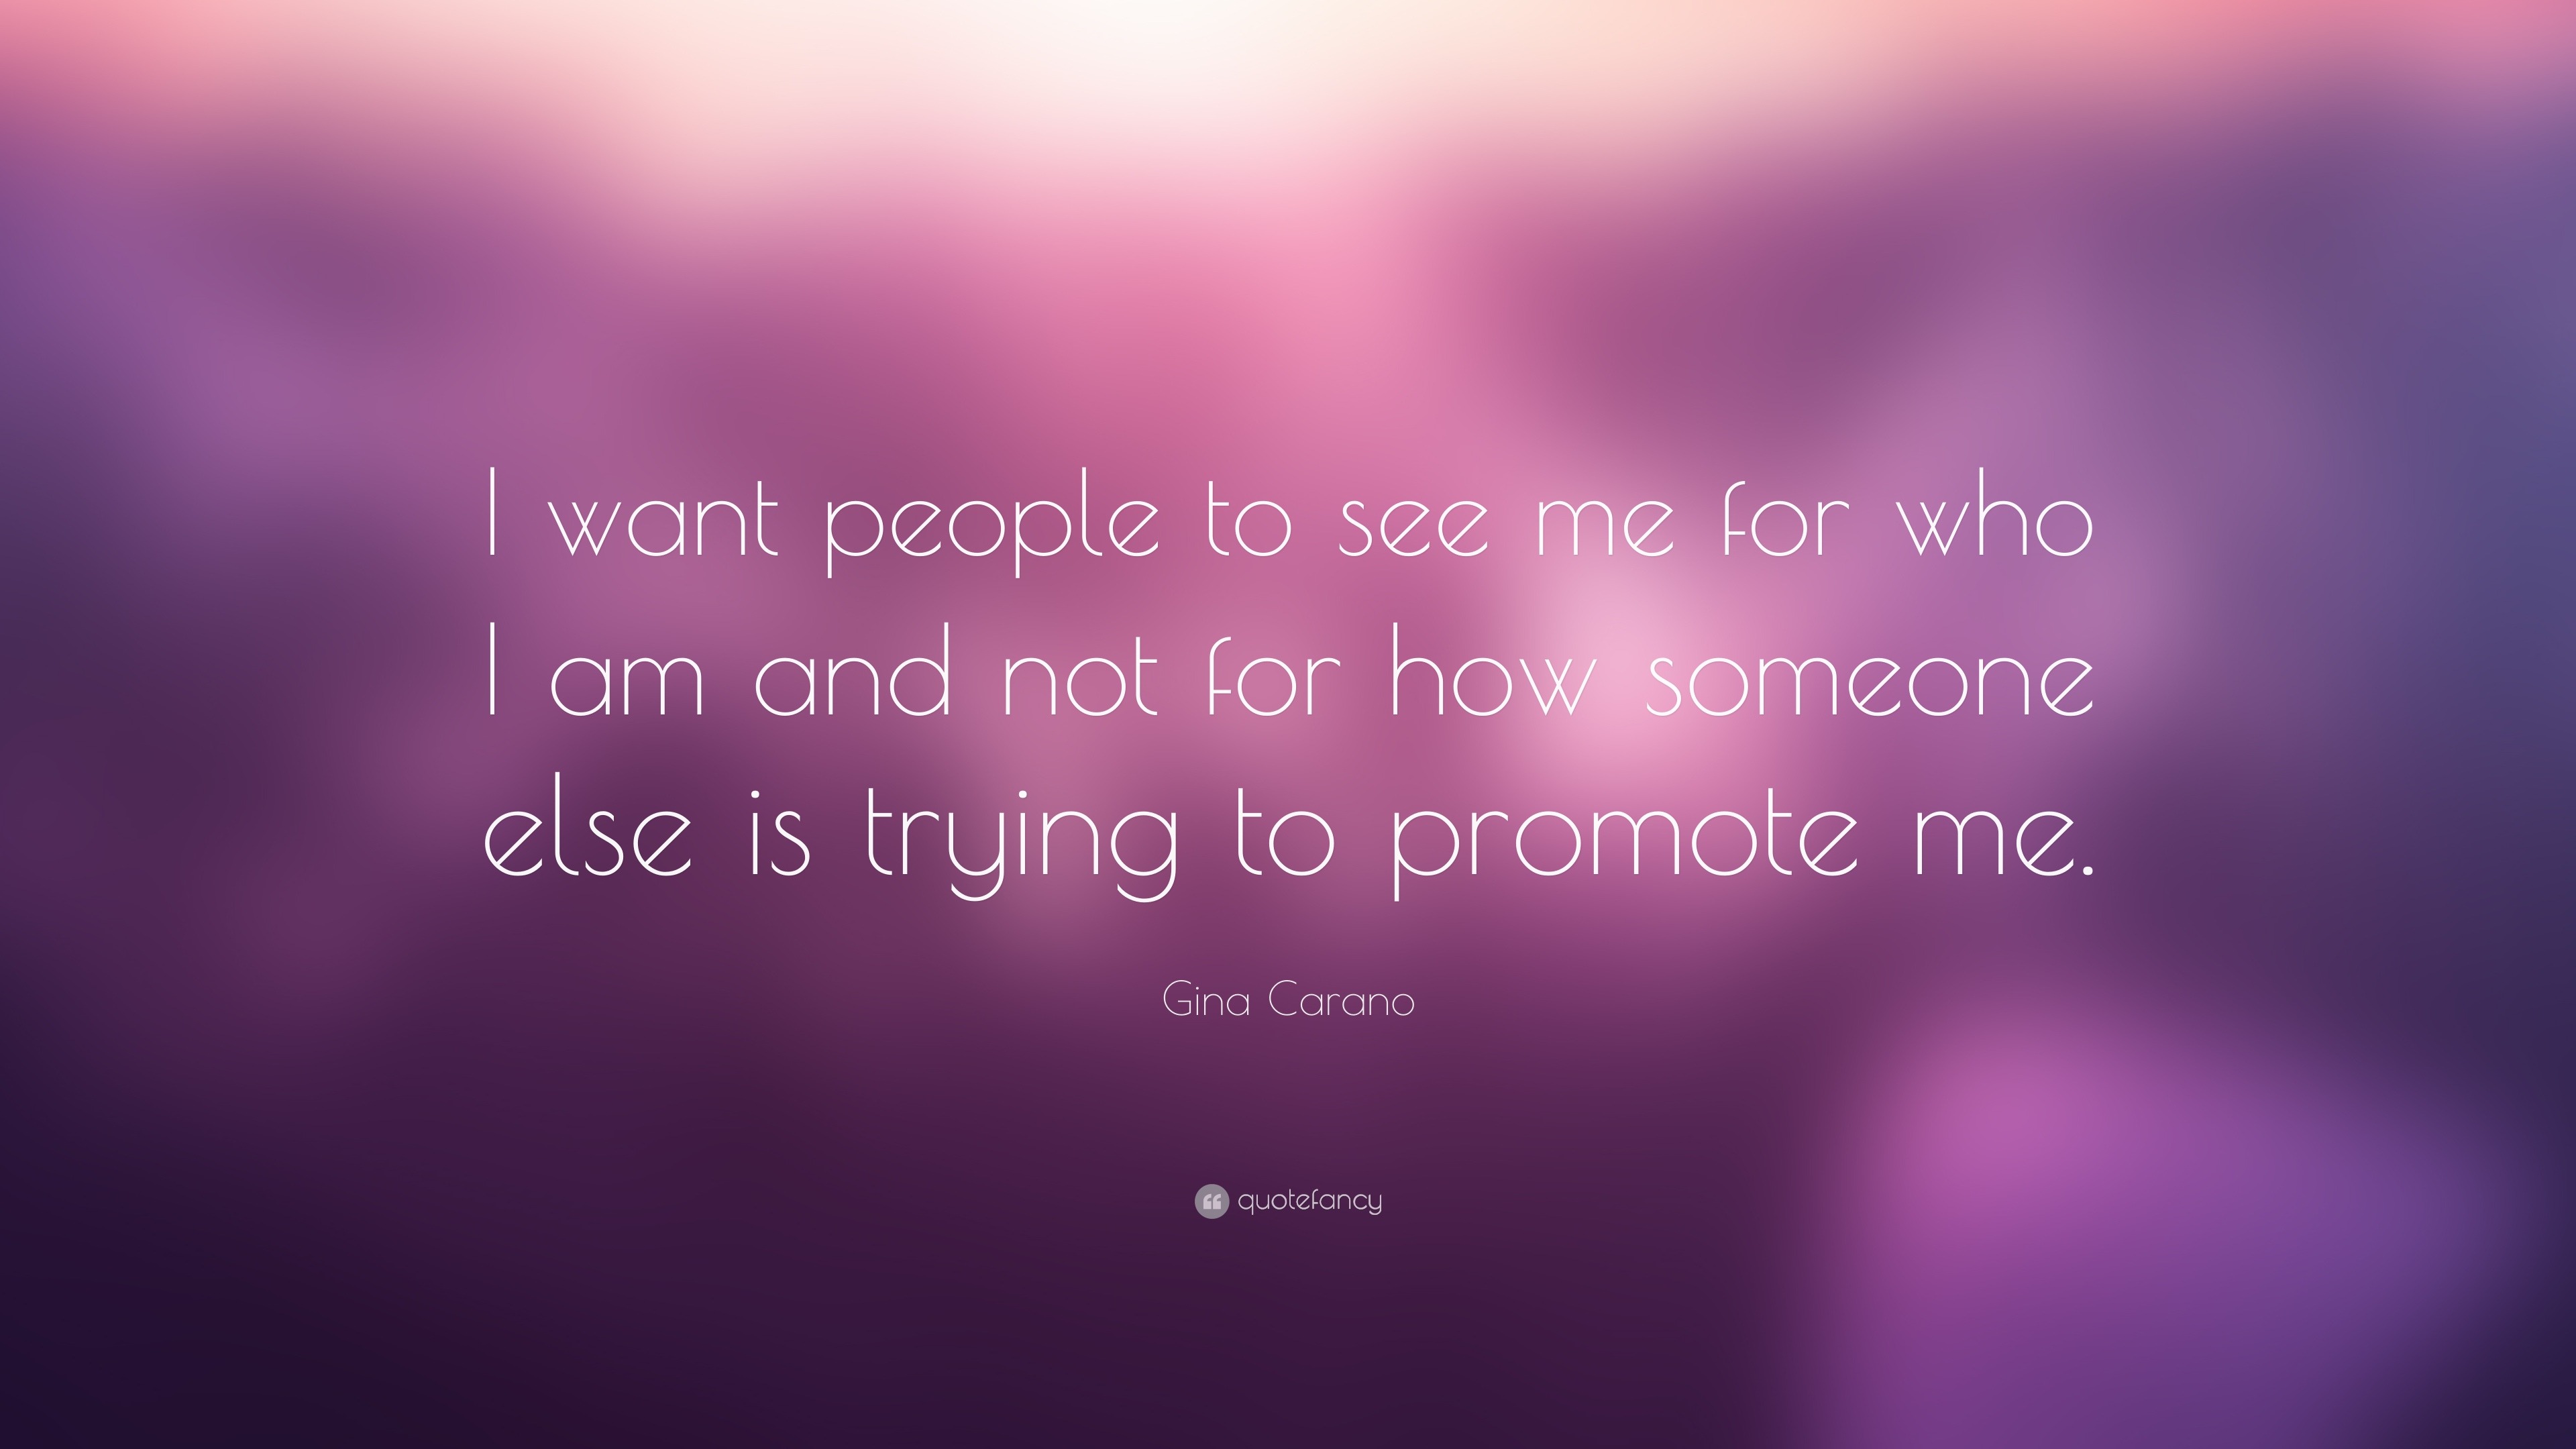 Gina Carano Quote: “I want people to see me for who I am and not for ...